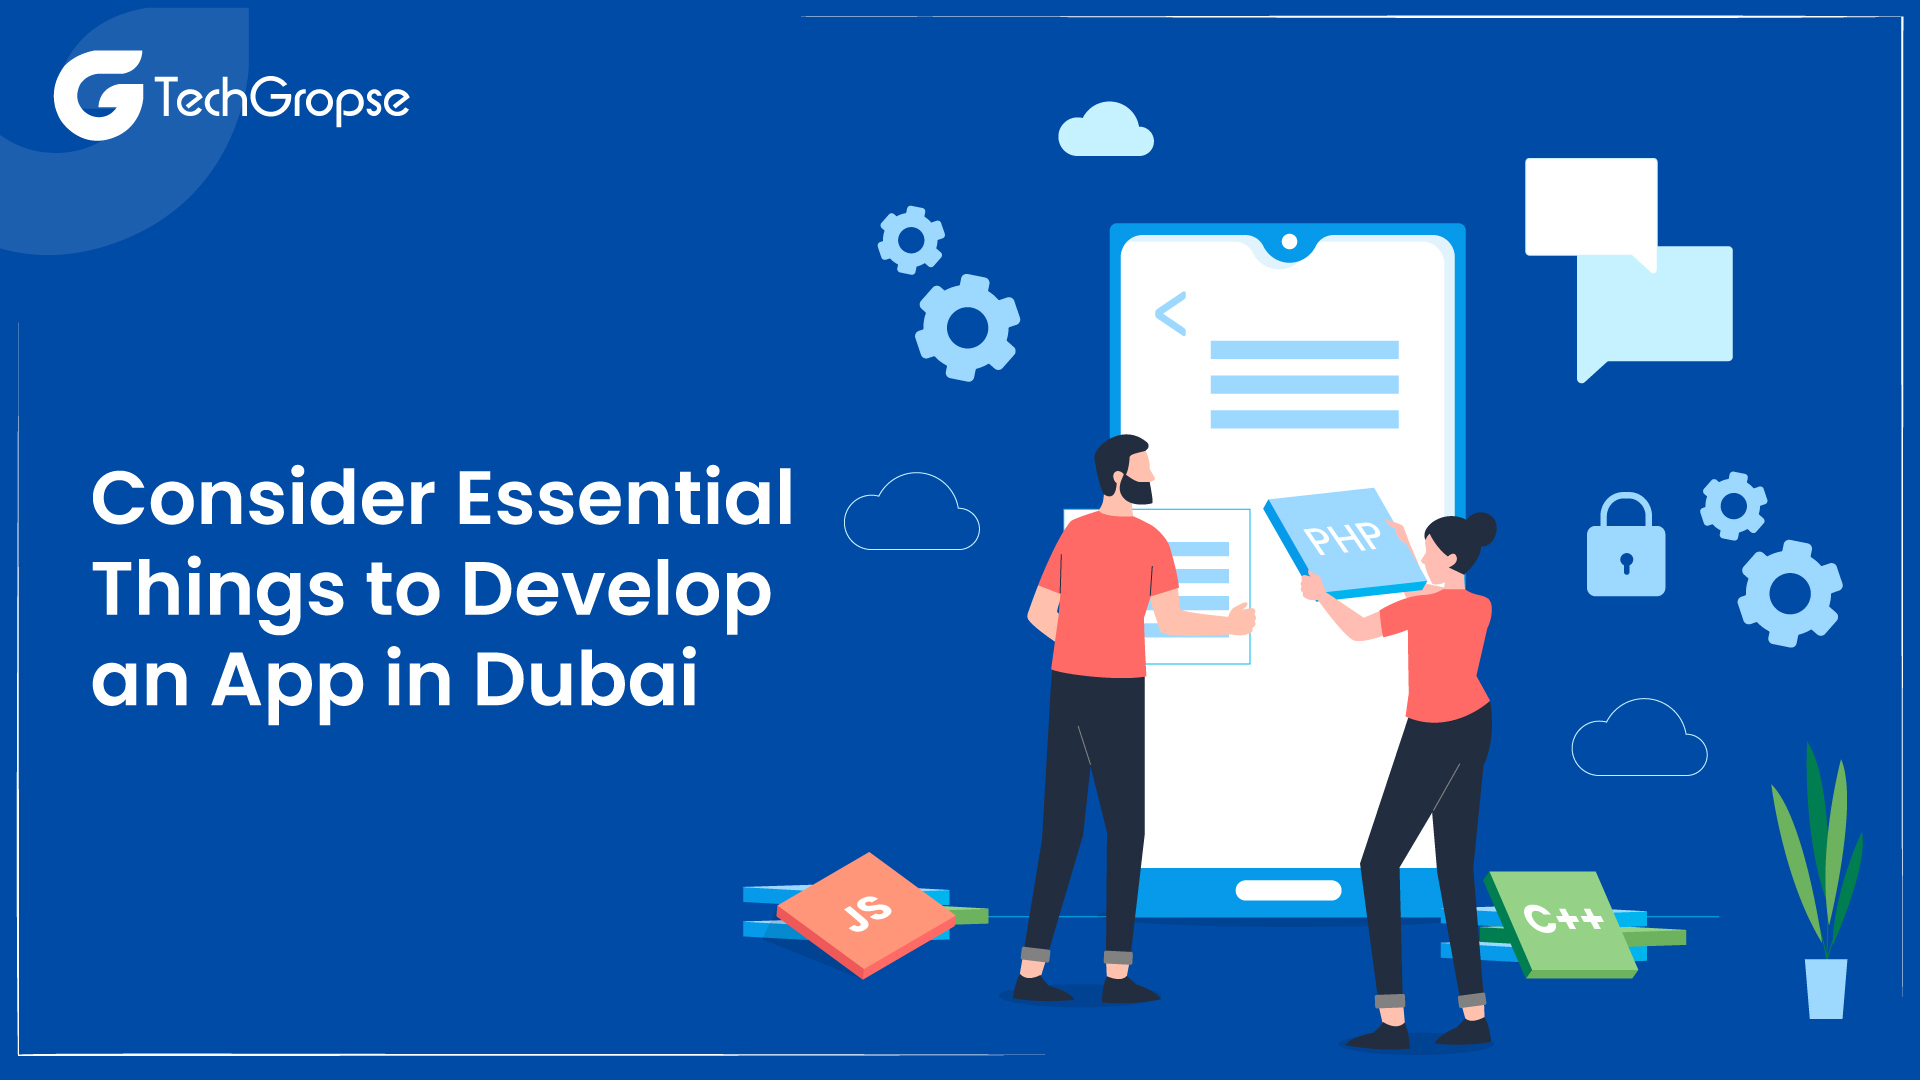 Consider Essential Things to Develop an App in Dubai